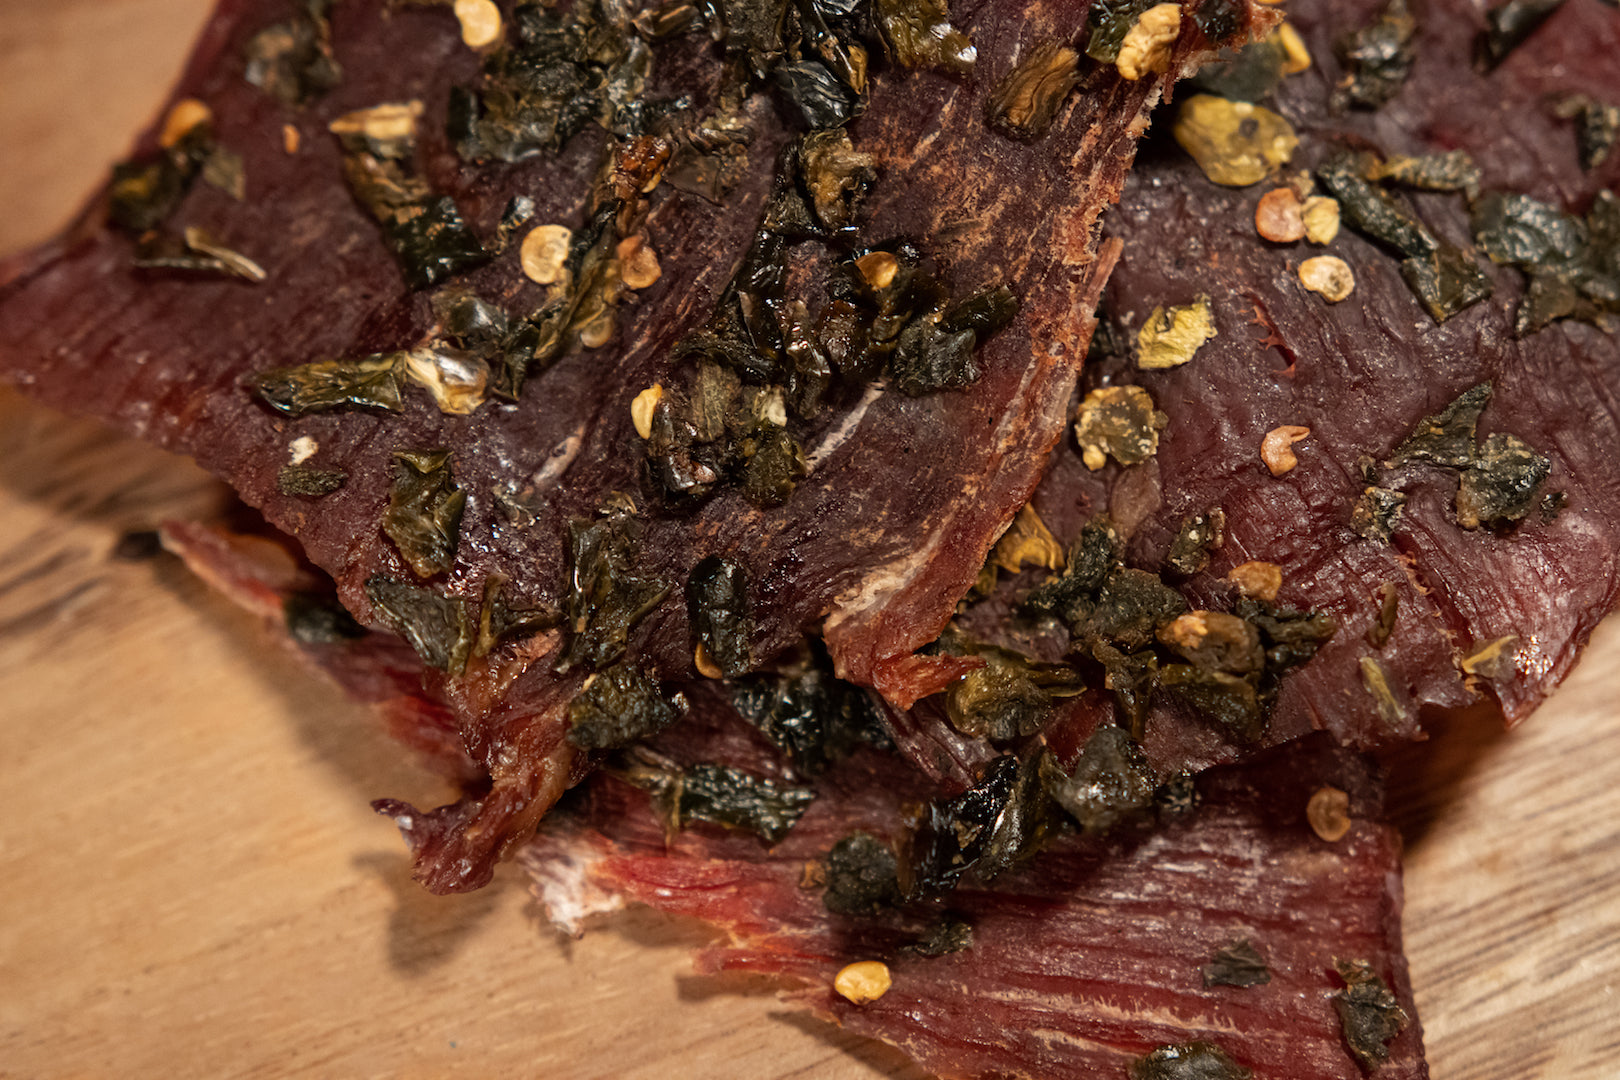 close up jerky picture showing jalapeño chips on the beef jerky